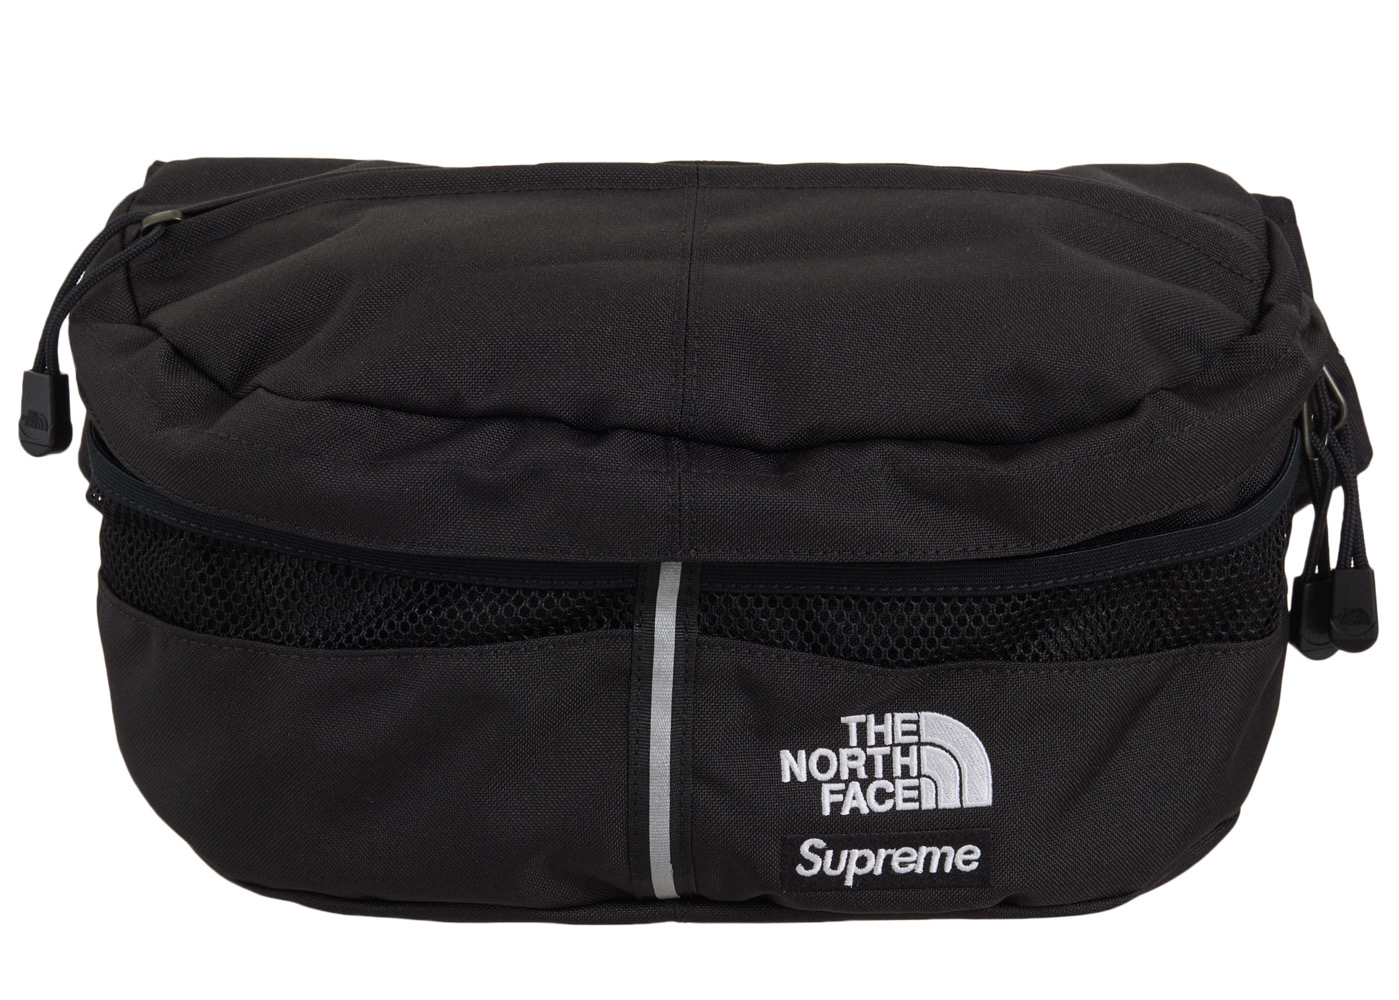 images.stockx.com/images/Supreme-The-North-Face-Sp...